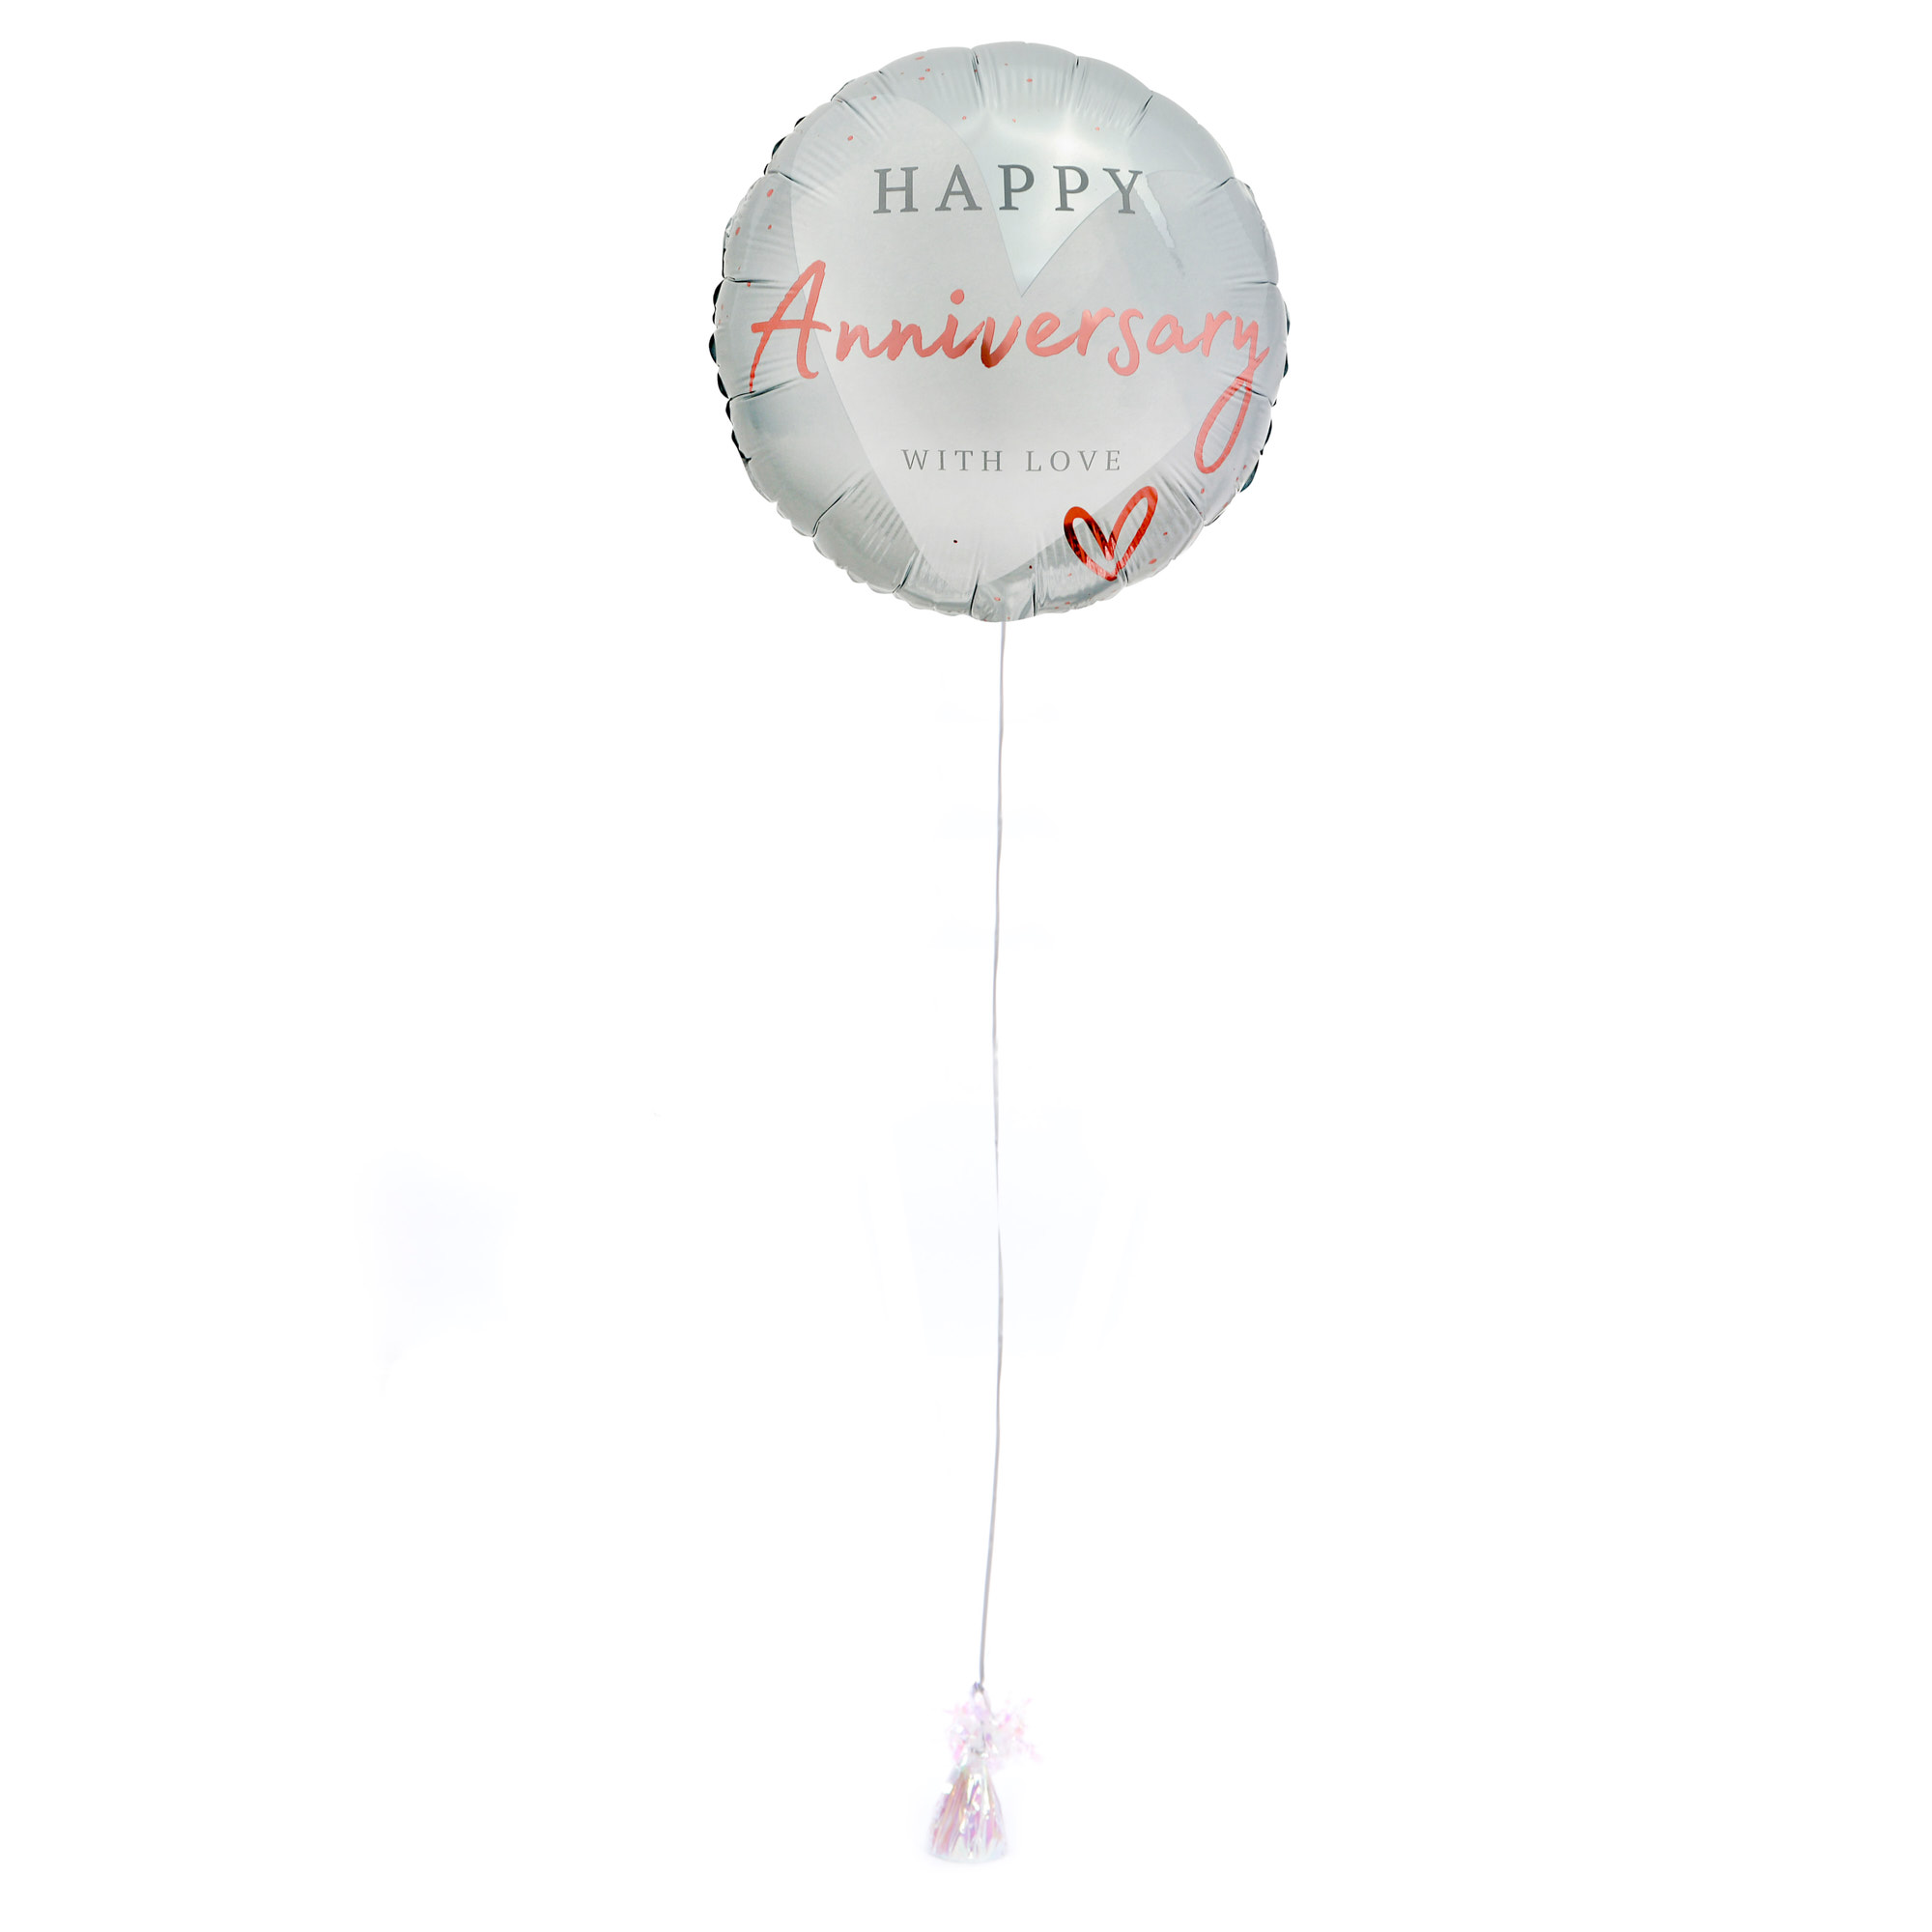 With Love Happy Anniversary Balloon & Lindt Chocolates - FREE GIFT CARD!